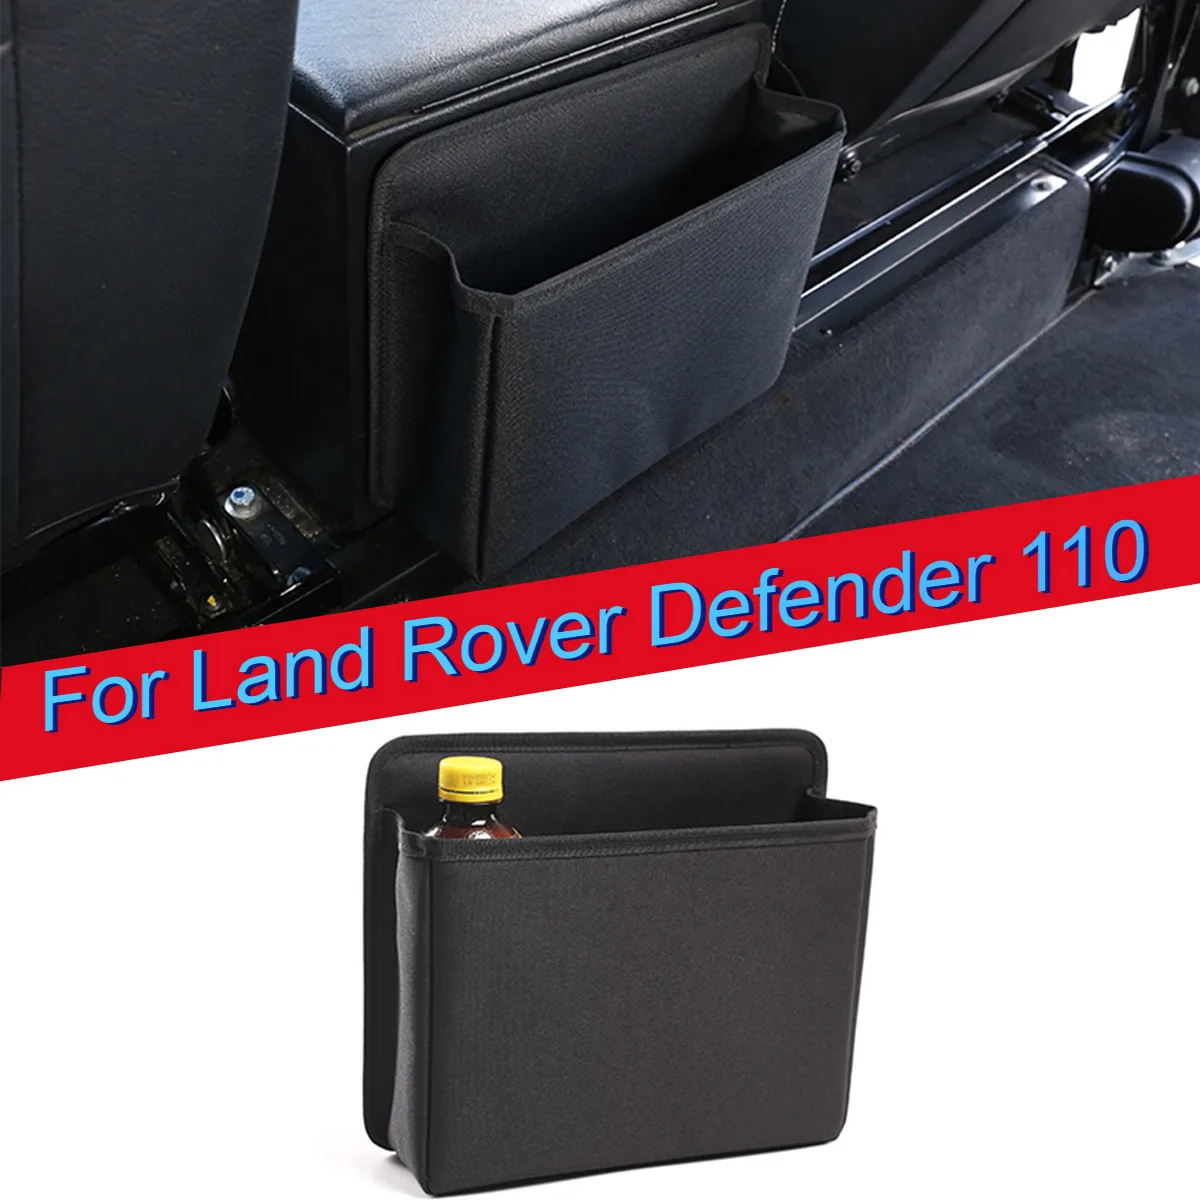 

For Land Rover Defender 110 130 For Landrover 90 Storage Box Behind the Armrest Storage Compartment Storage Bags Car Accessories